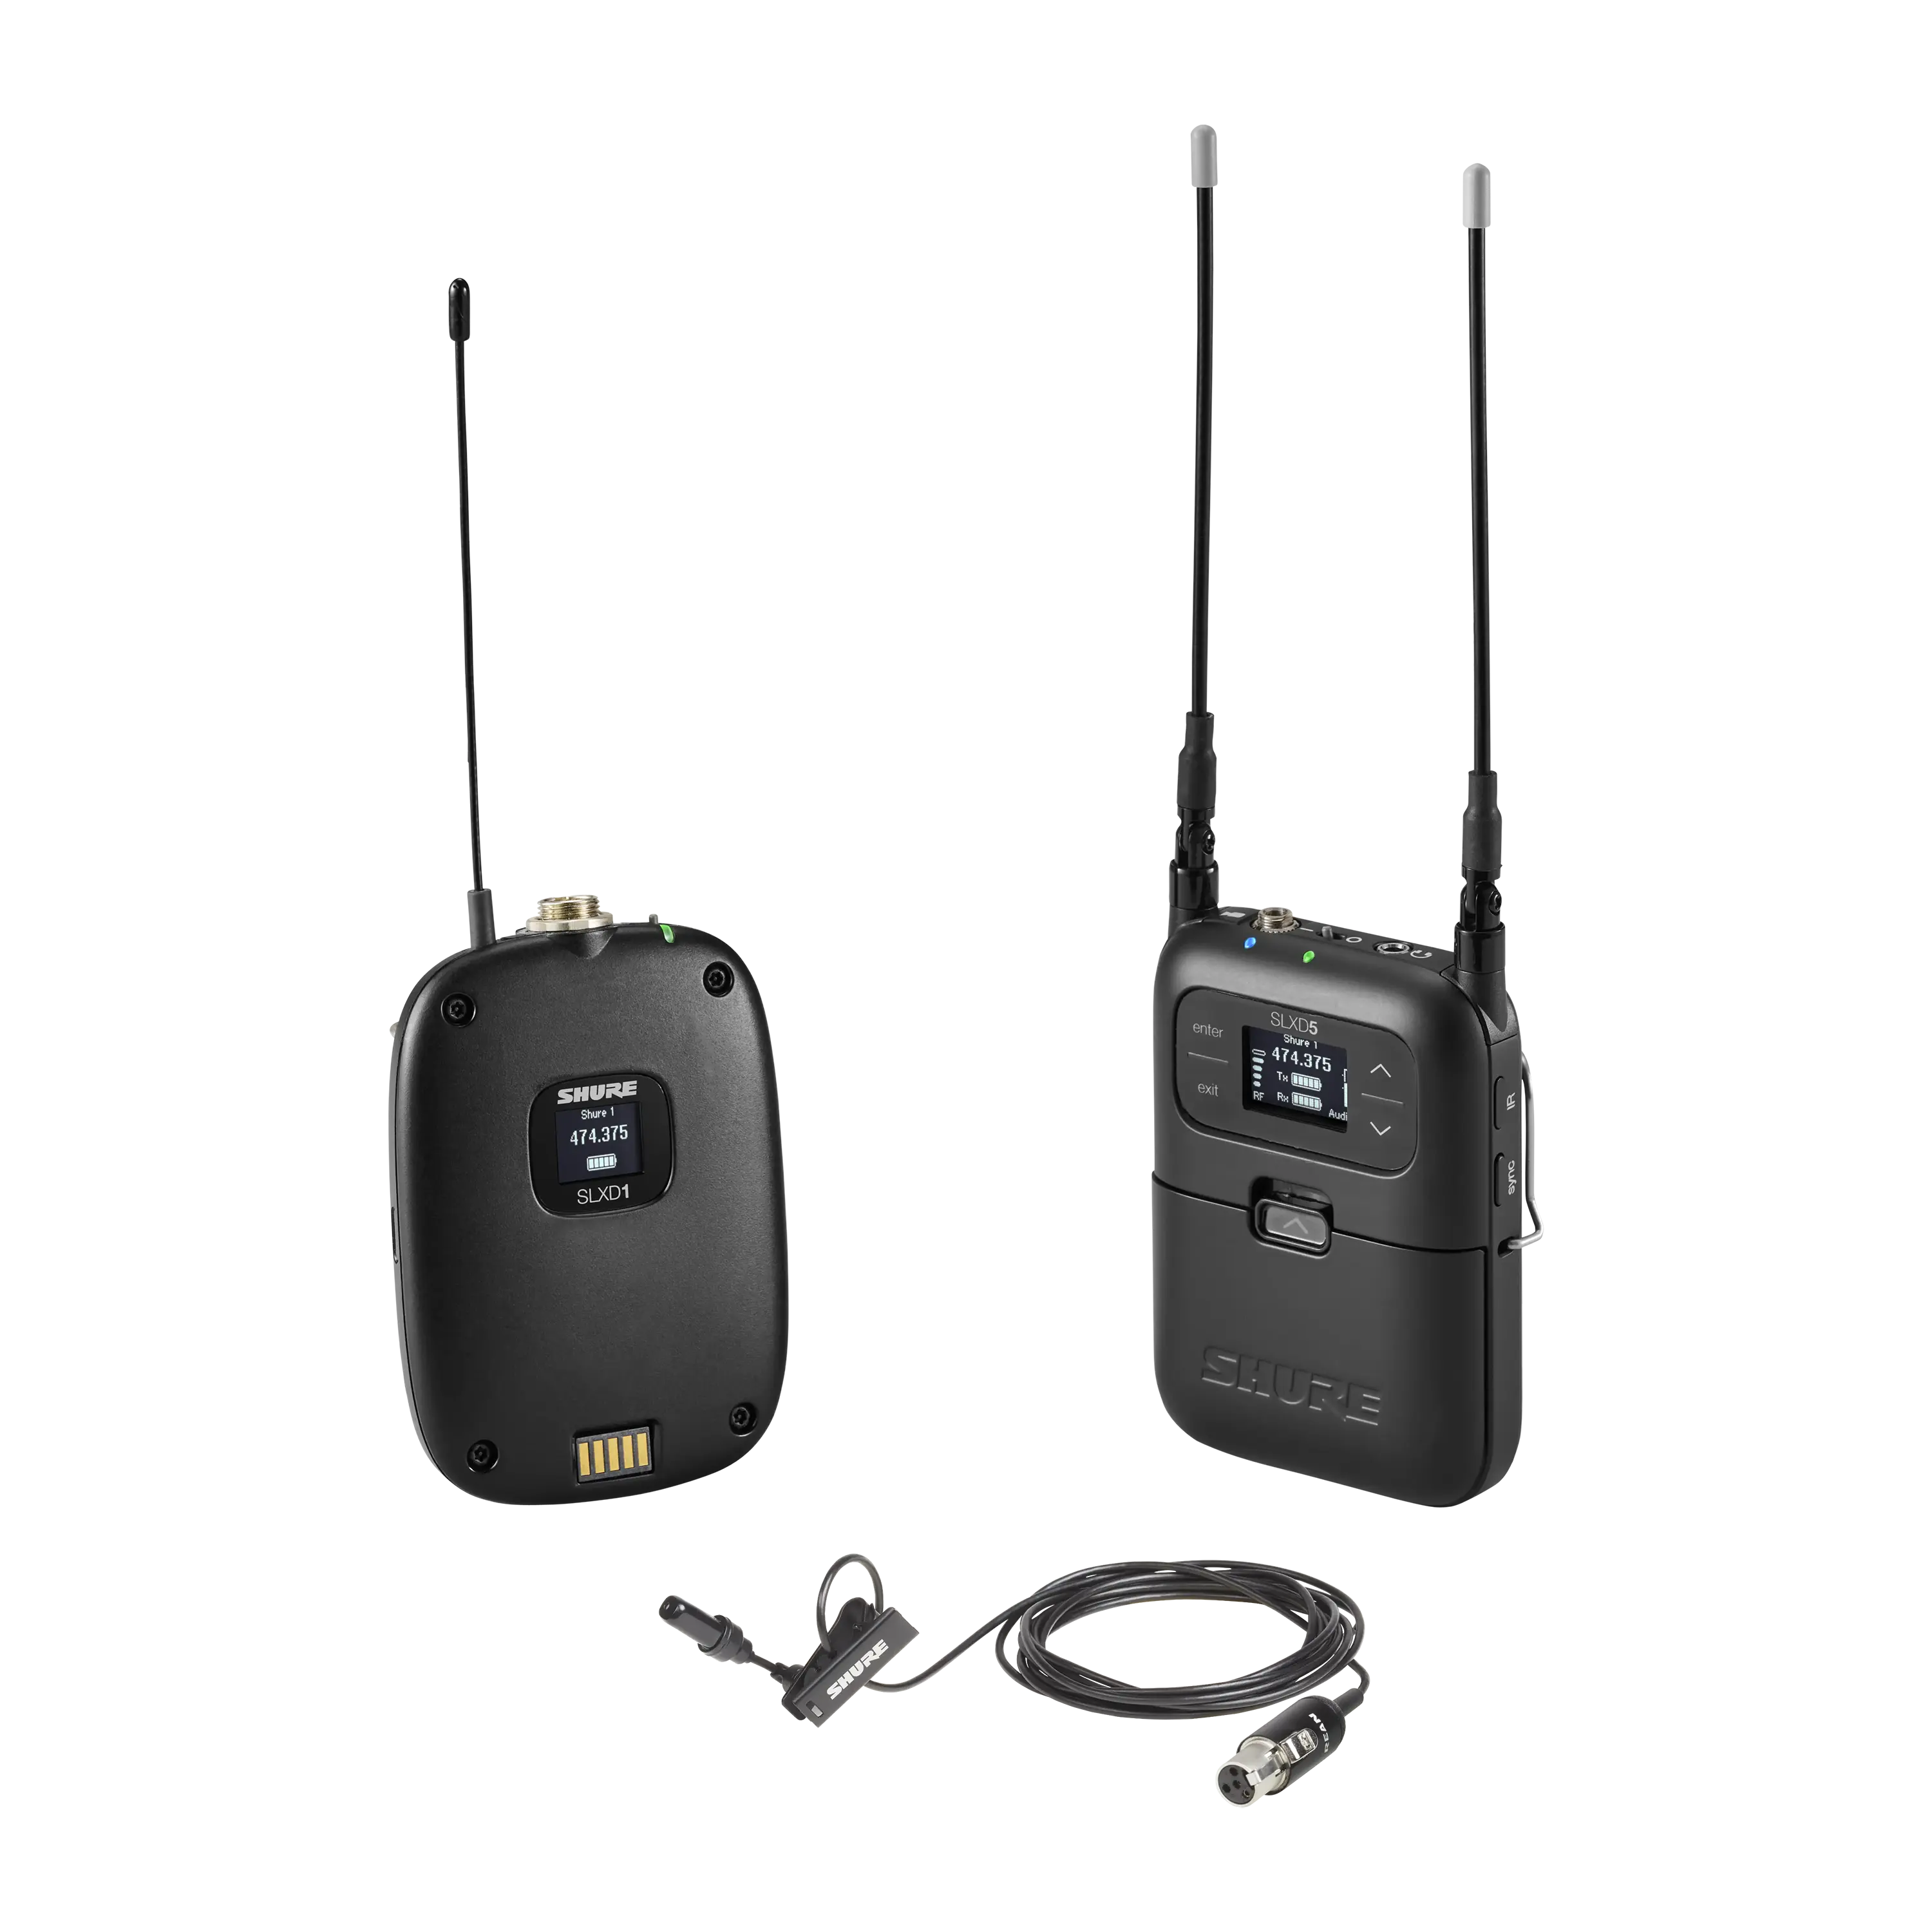 SLXD15/UL4B-H55 Portable Wireless System With SLXD1 Bodypack Transmitter And UL4B Lavalier Microphone